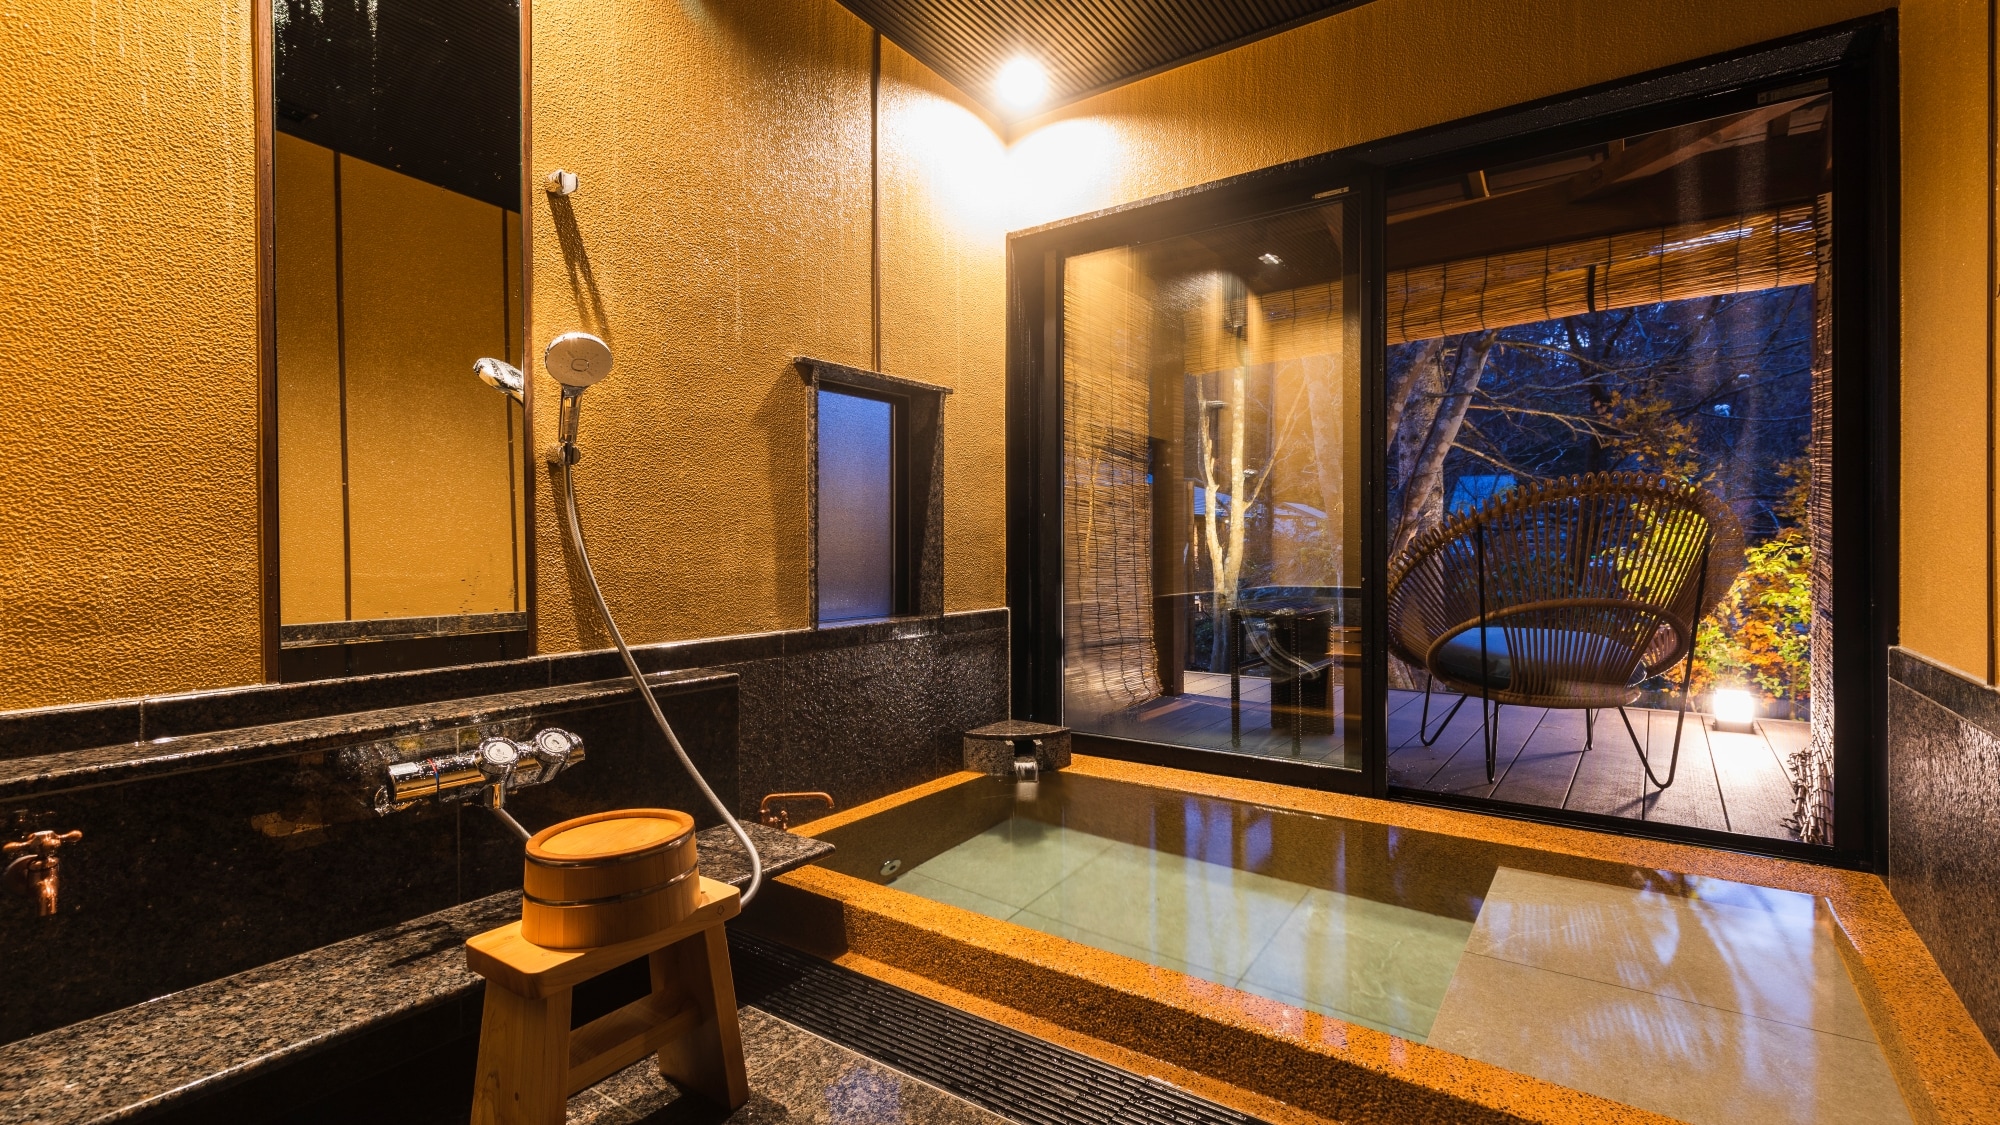 [Annex "Geckkan"] You can enjoy the source of Tsuta Onsen, which is full of nature's blessings, even in your room.